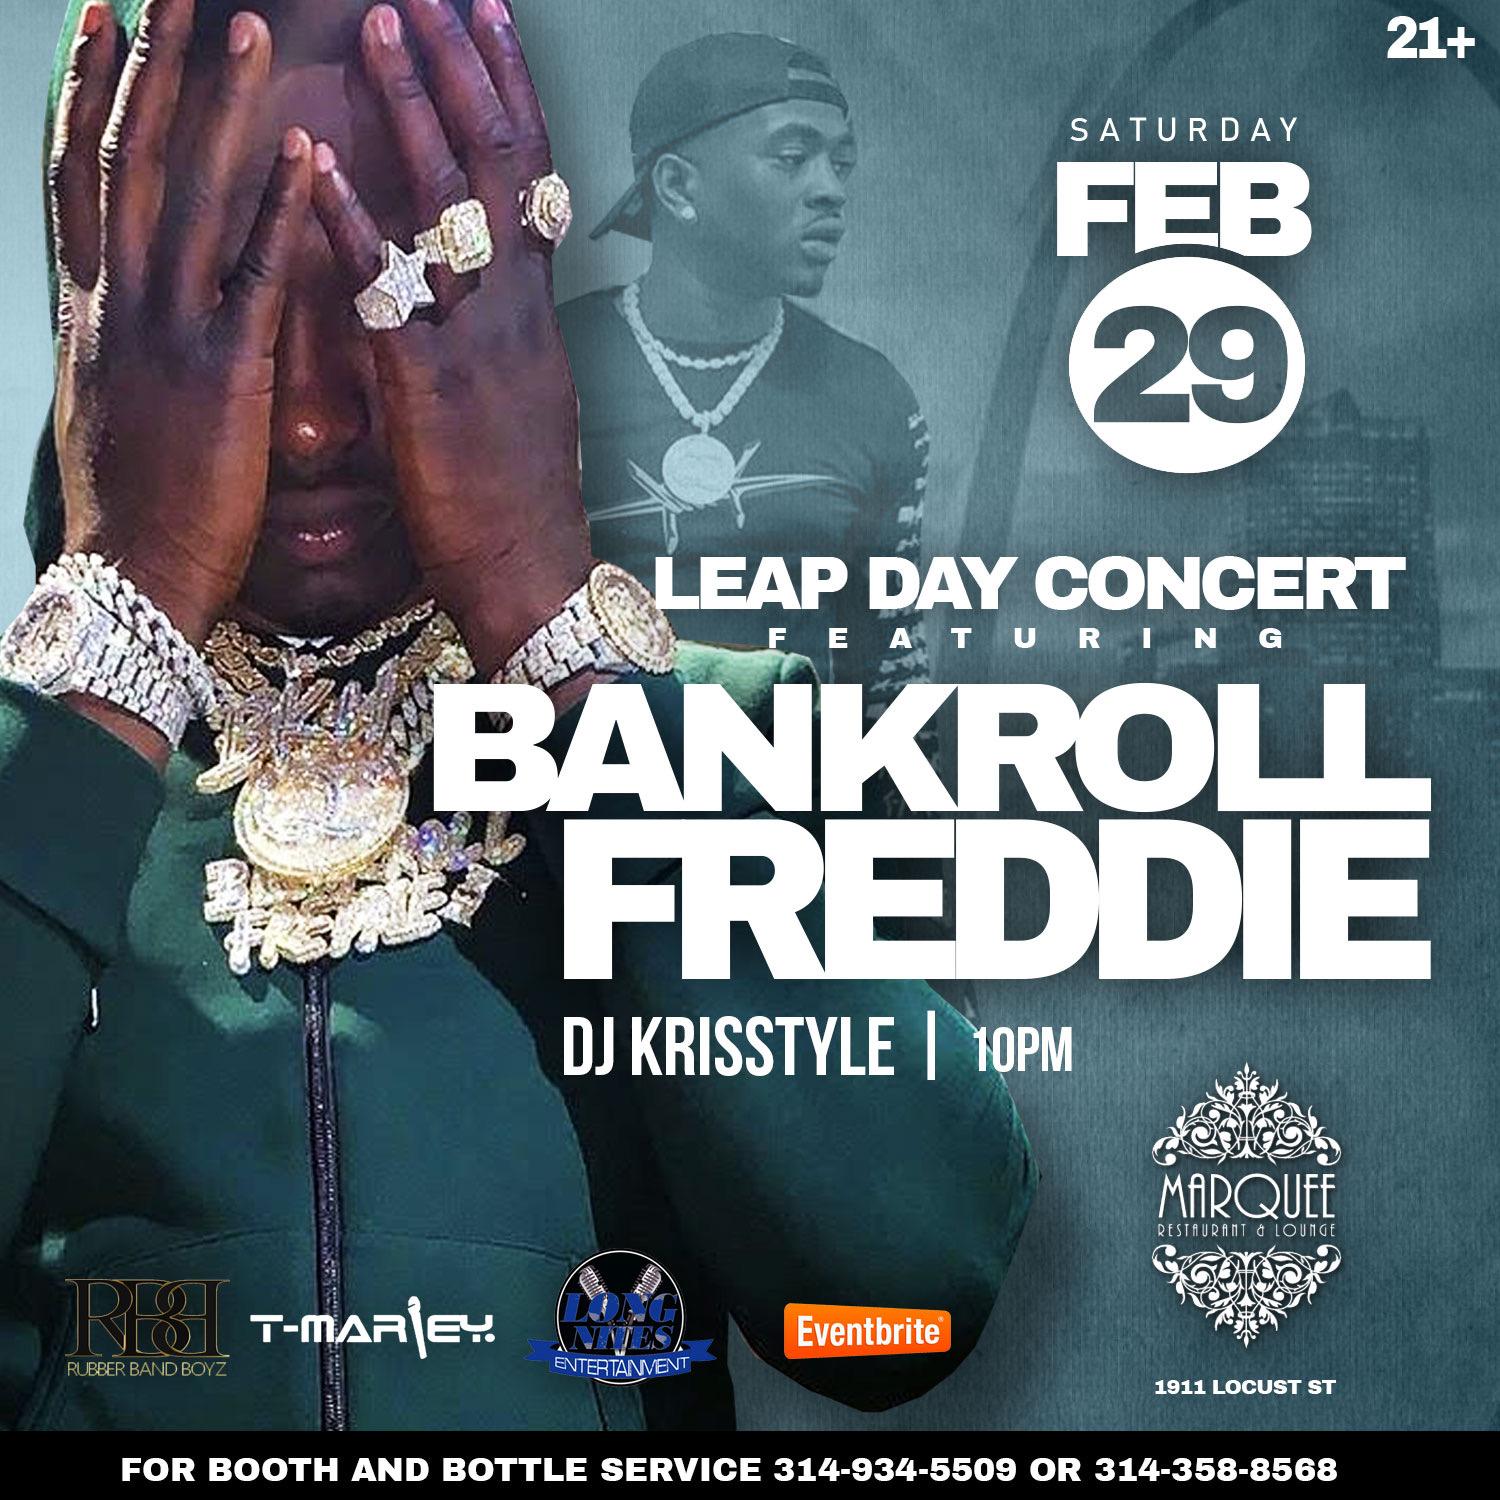 ‼️‼️The Official LEAP DAY CONCERT ‼️‼️ feat BANKROLL FREDDIE